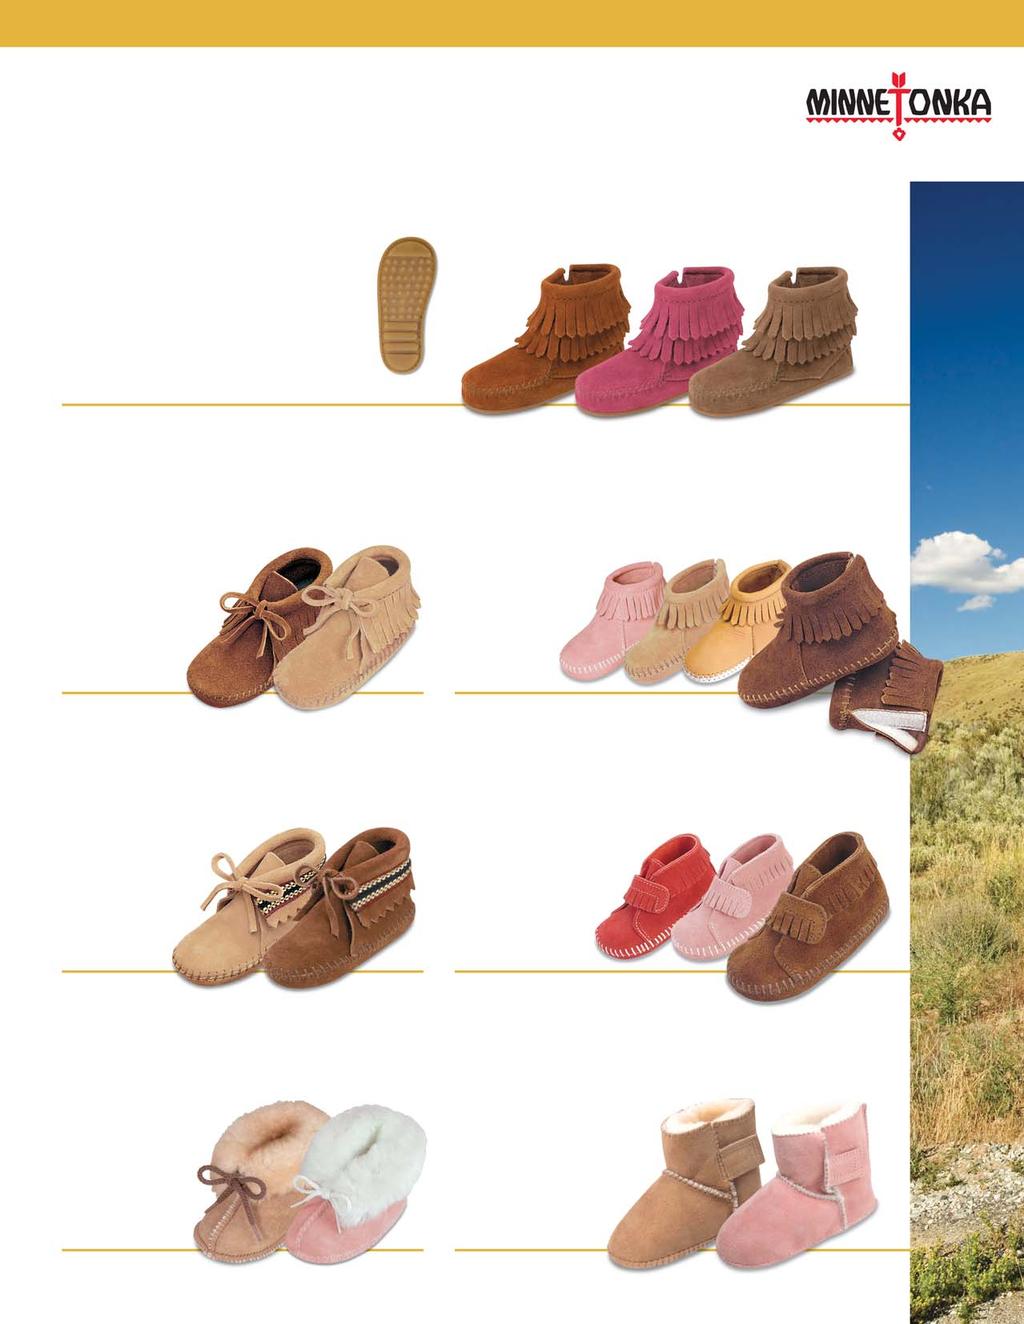 Infant Moccasin soul for little feet. Genuine Minnetonka style, soft, rich suede natural leathers - easy to wear and tailored for toddlers. All Styles In Stock For Immediate Delivery.